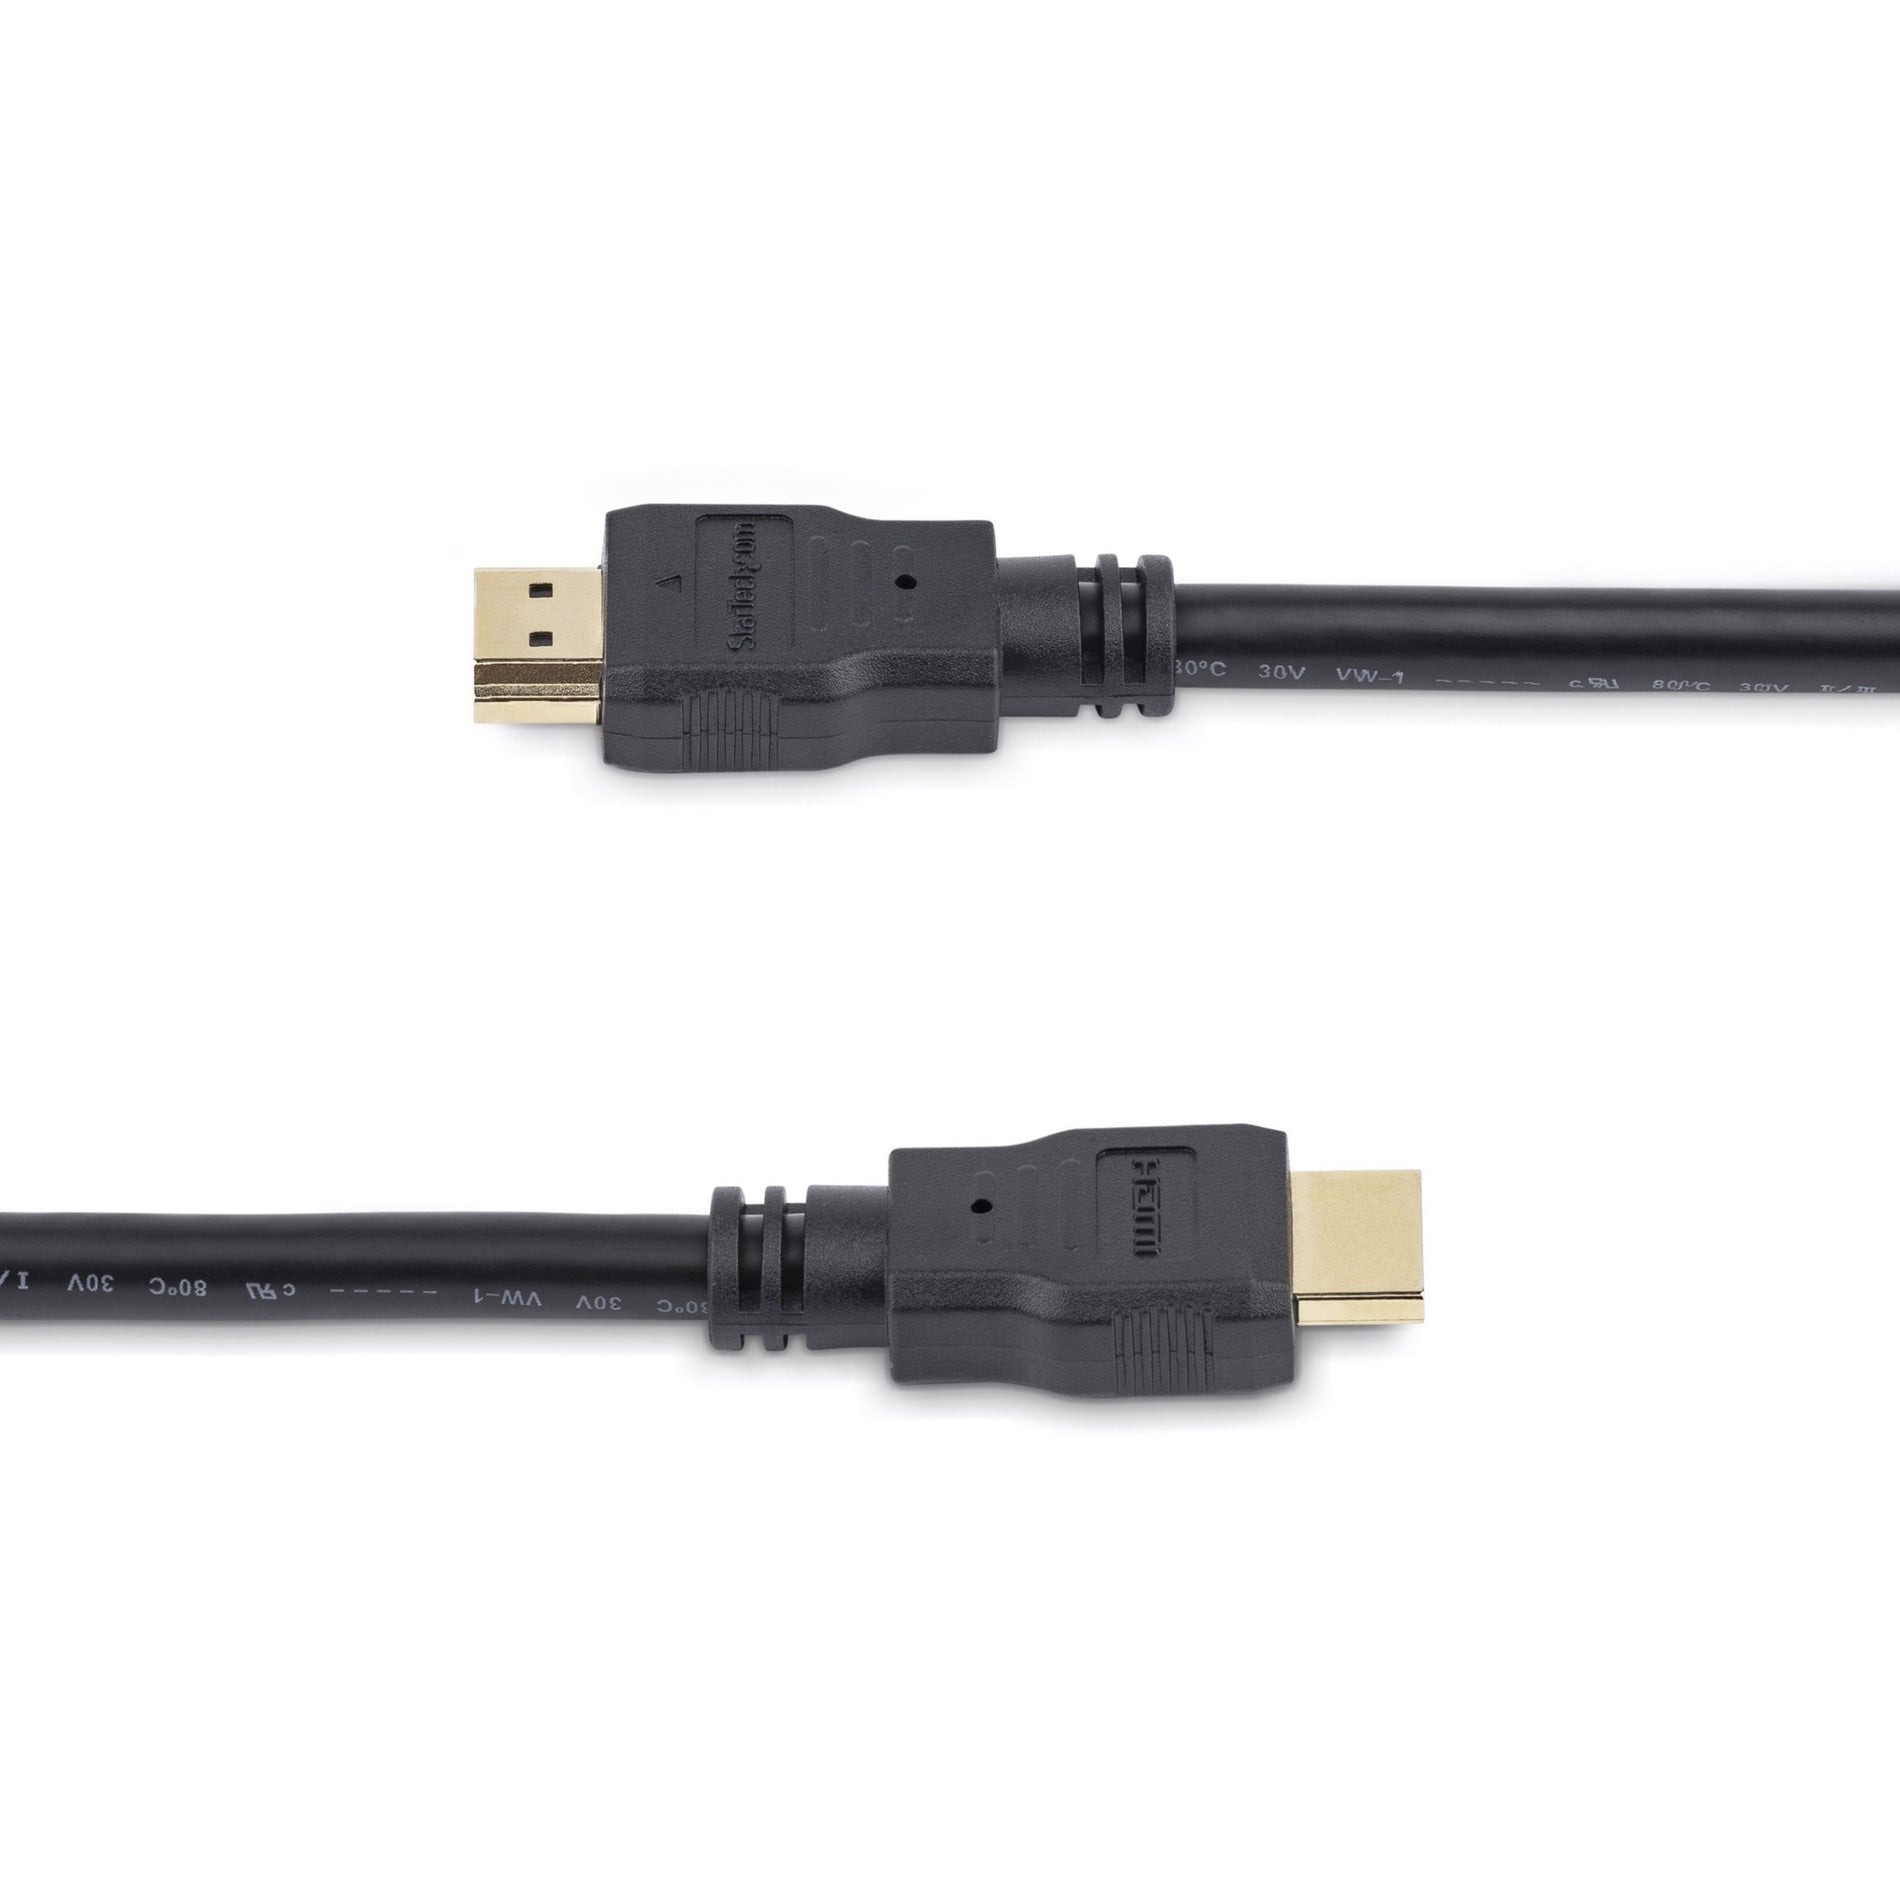 StarTech.com HDMM1M 1m High Speed HDMI Cable - Ultra HD 4k x 2k HDMI Cable, Molded, Corrosion Resistant, Strain Relief, Copper Conductor, Shielded, 3.28 ft, Gold Plated Connectors, 28 AWG, 3840 x 2160 Supported Resolution, Black